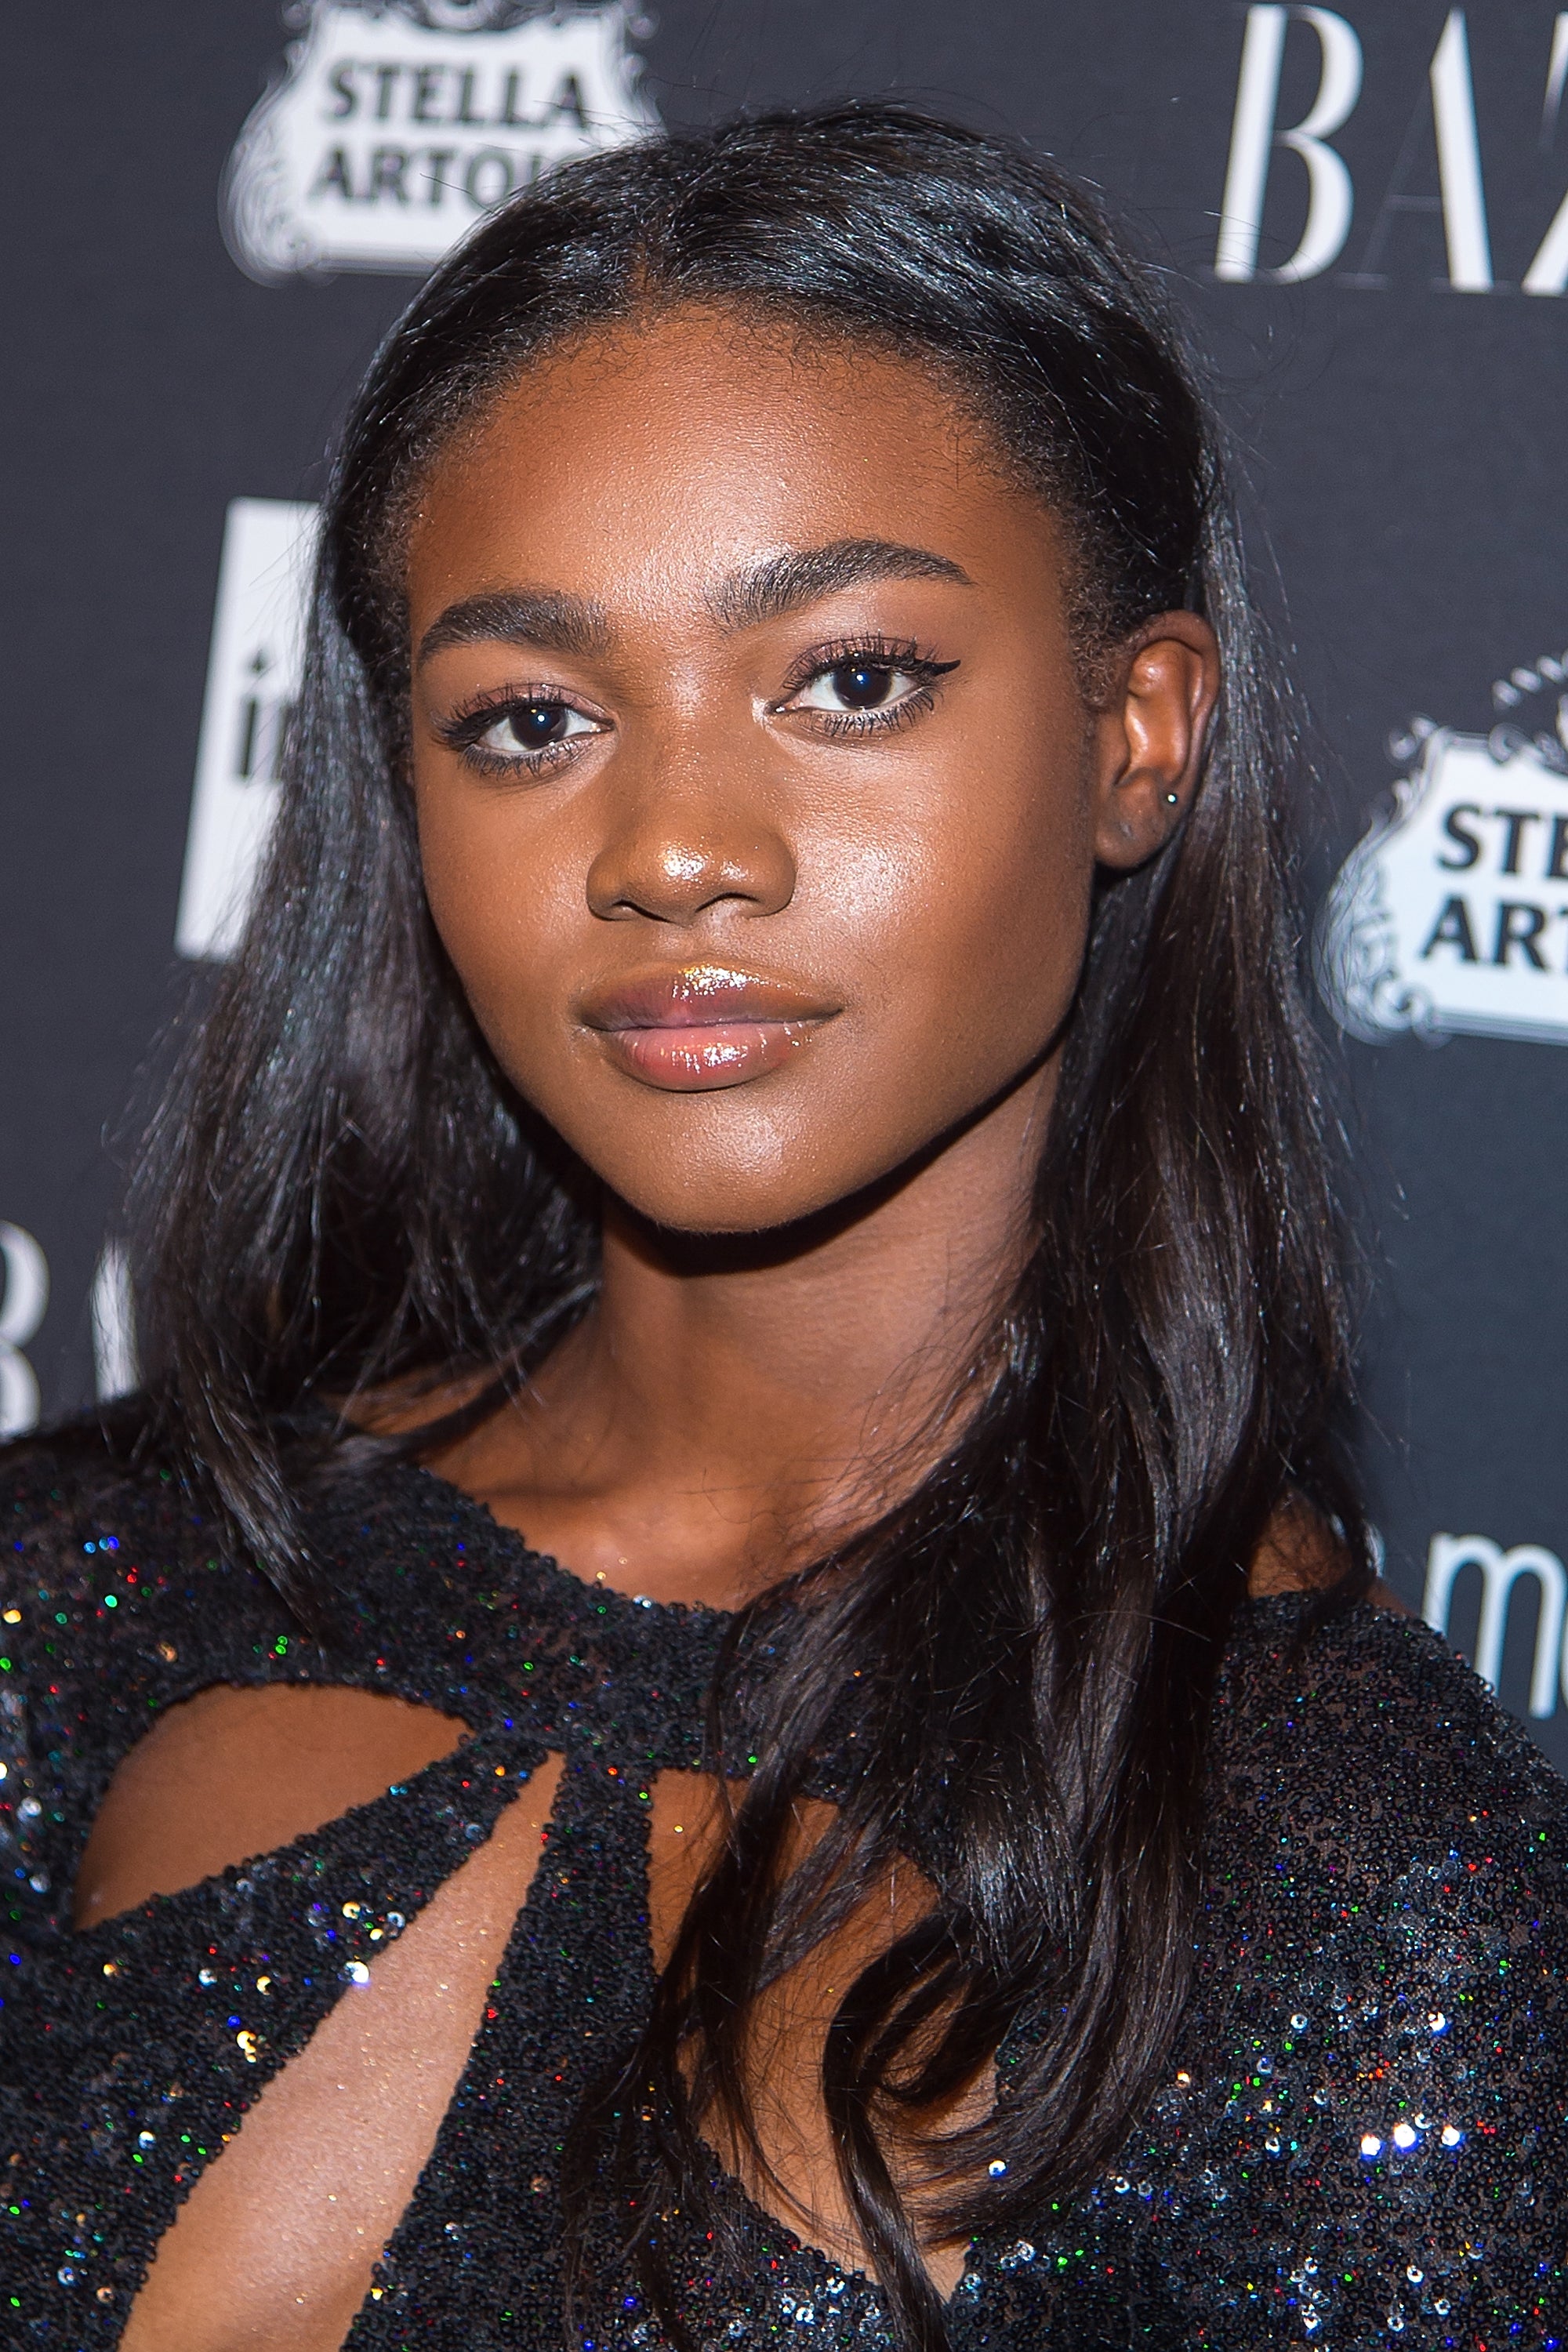 Zuri Tibby Becomes Victoria's Secret First-Ever Black Spokesmodel for PINK
